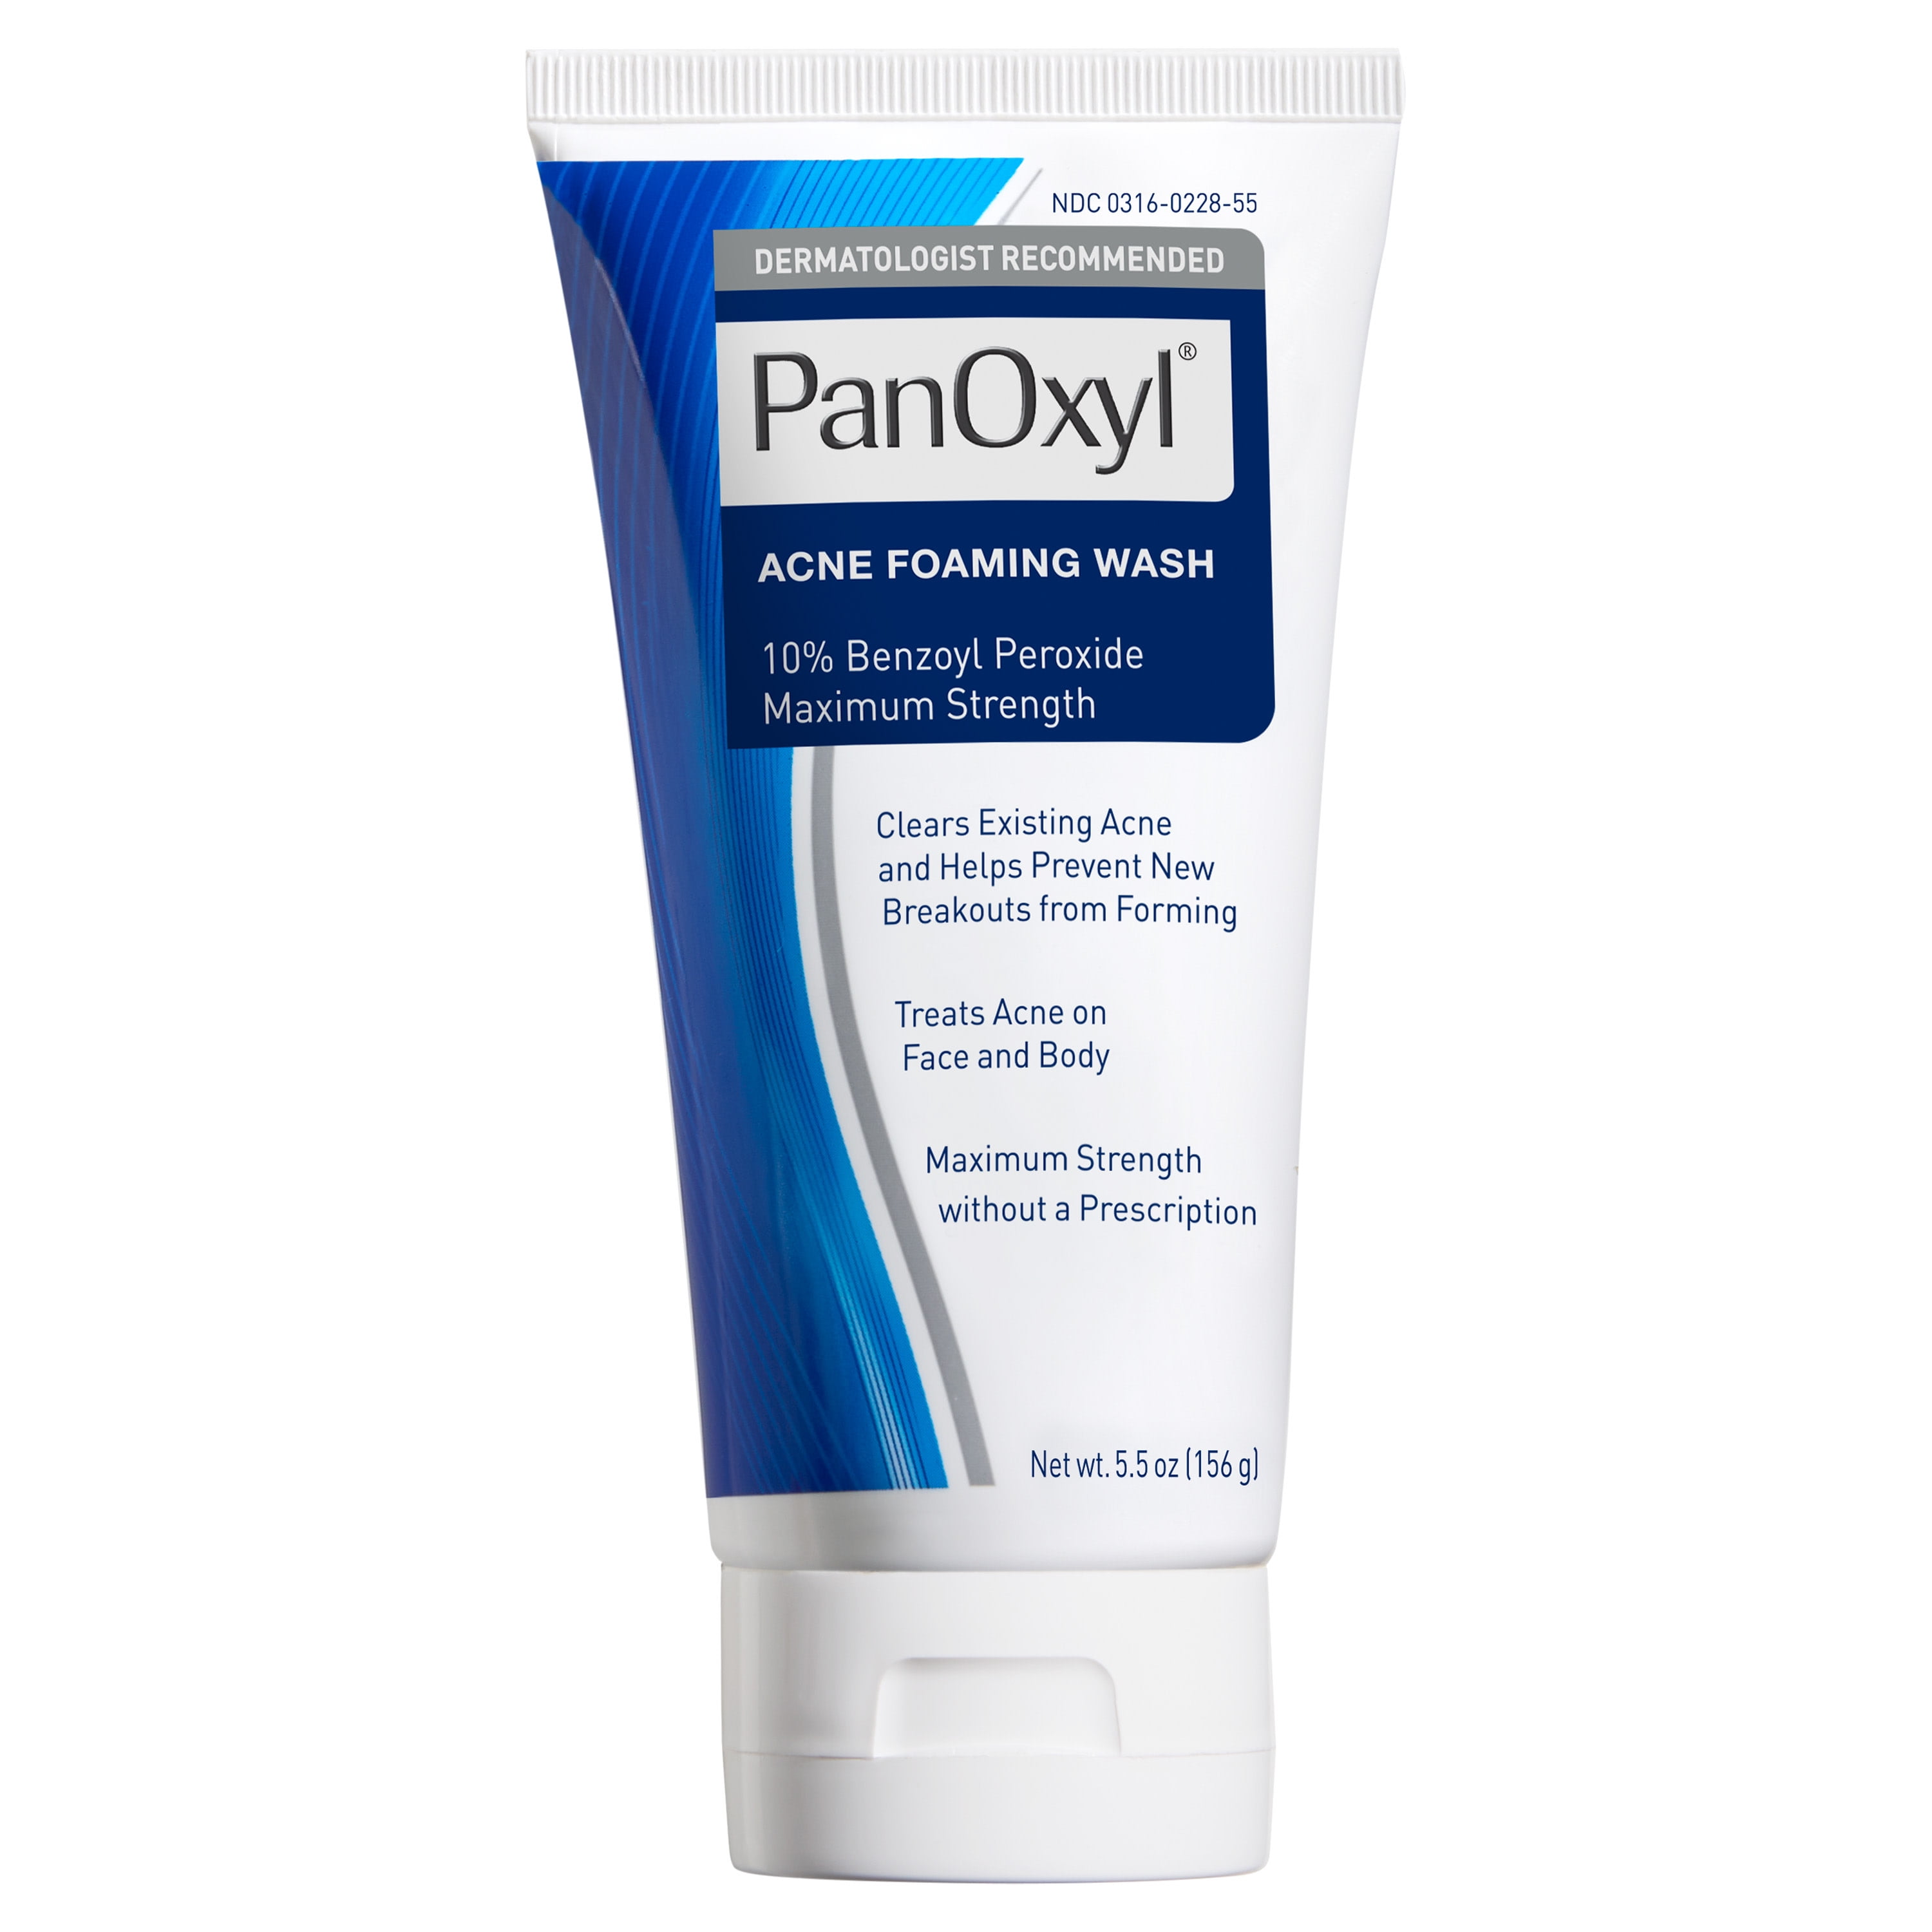 PanOxyl Max Strength Acne Foaming Wash, Face & Body, 10% Benzoyl Peroxide, 5.5 oz